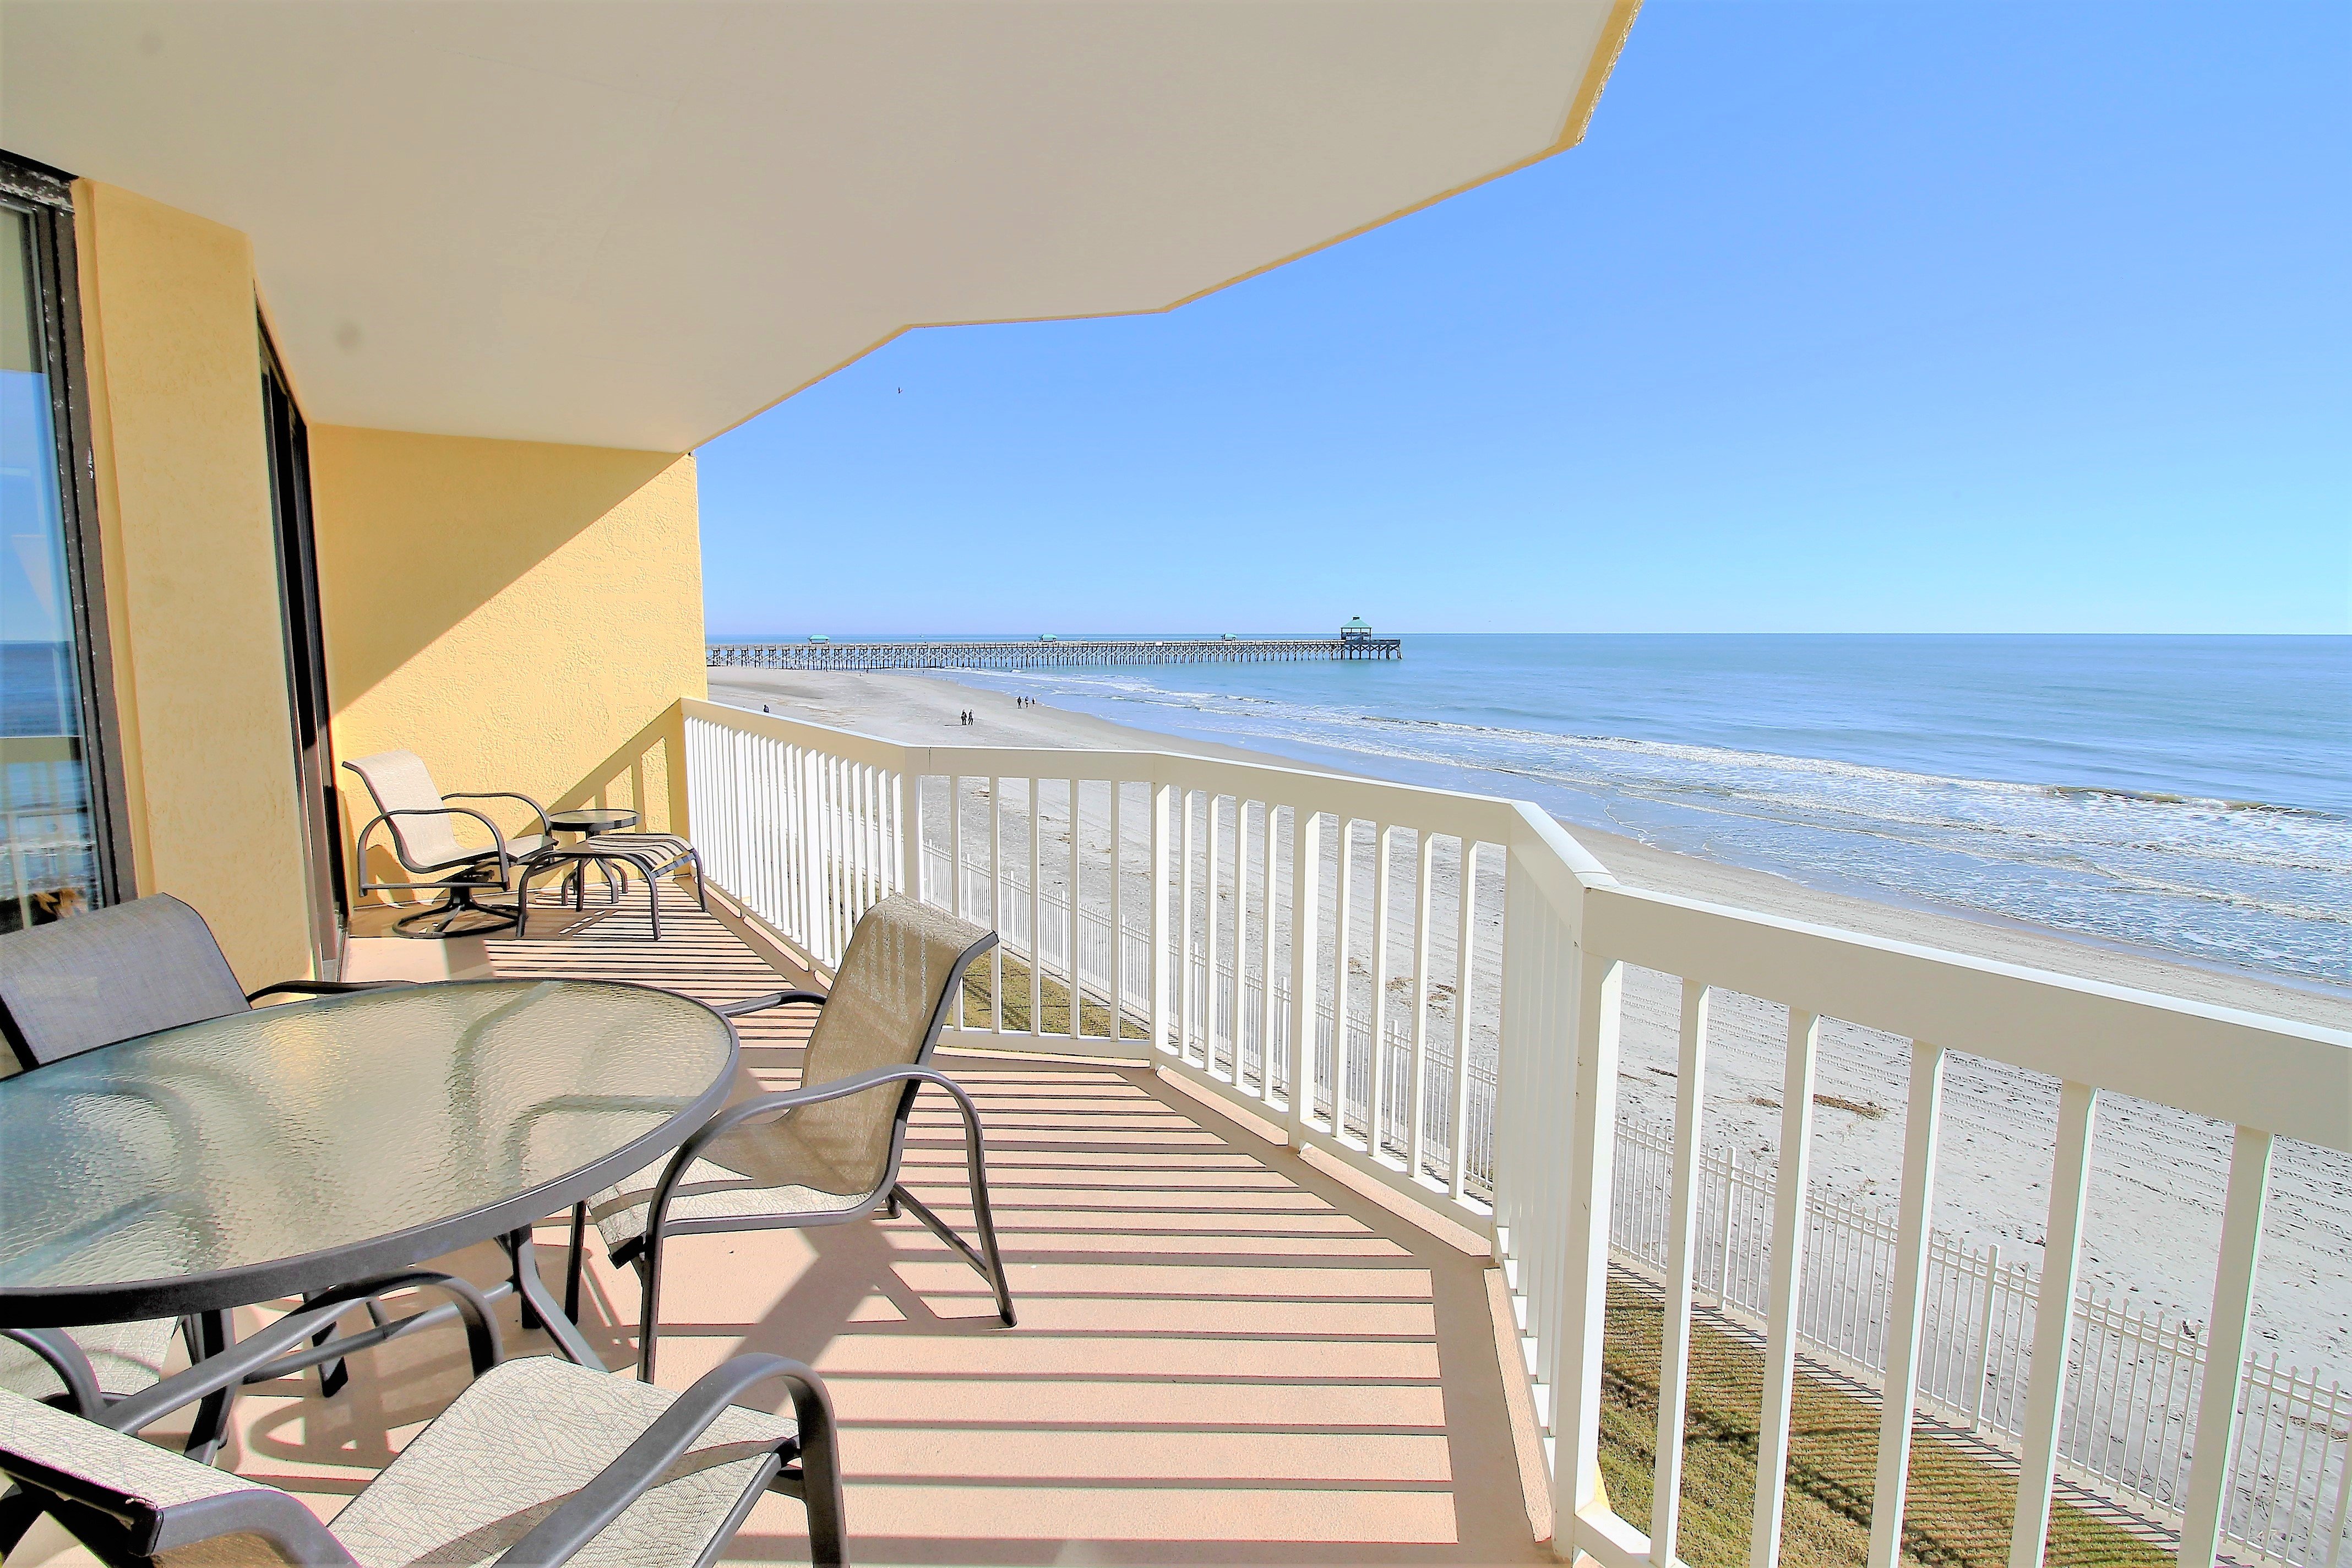 213 COV - BEAUTIFUL OCEANFRONT VILLAS WITH INCREDIBLE VIEWS